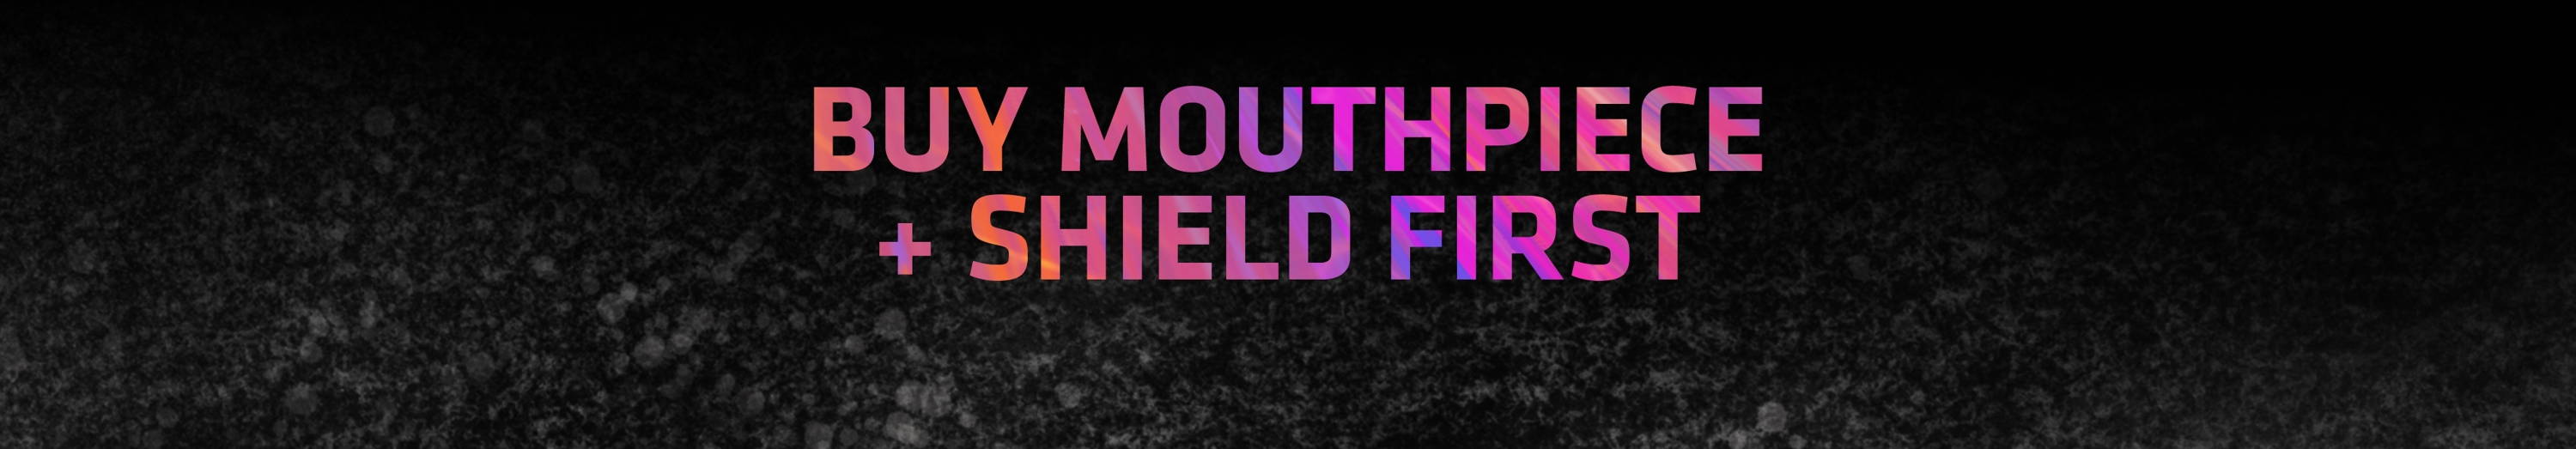 Buy Mouthpiece + Shield First